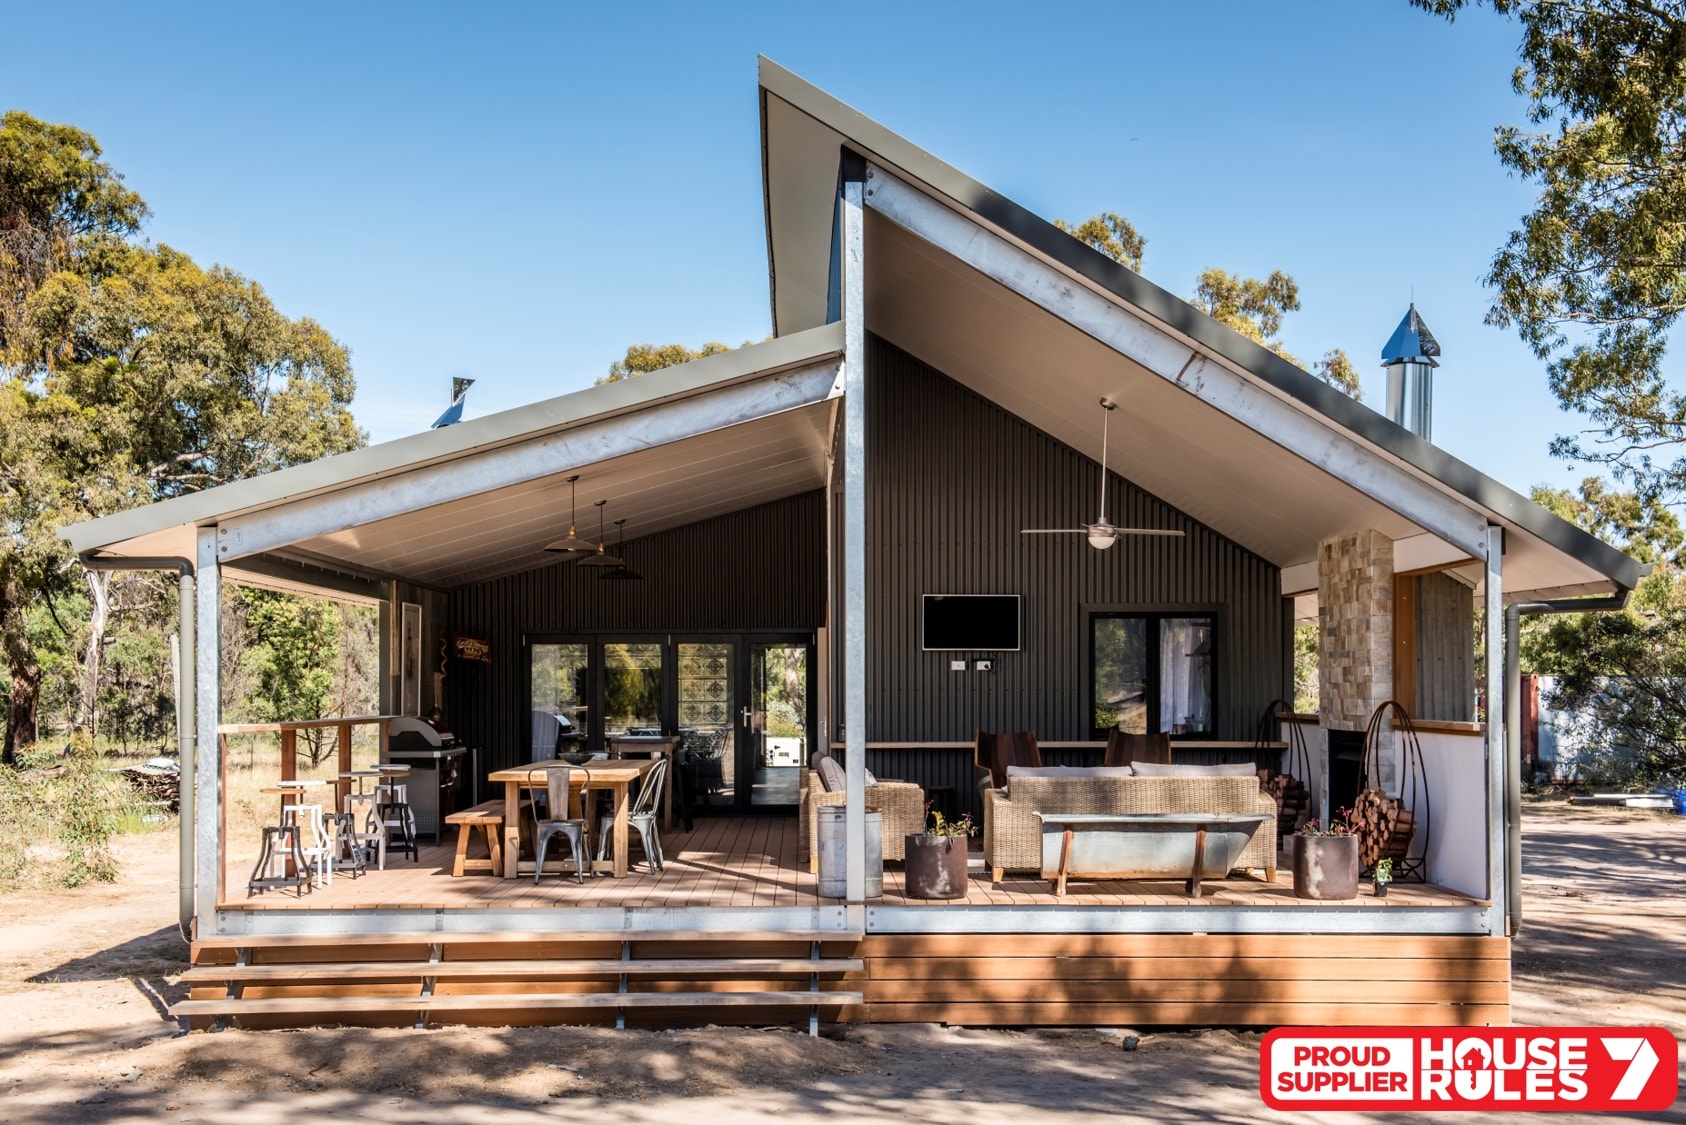 House Rules Victorian house reveal of outdoor area on boxspan floor system